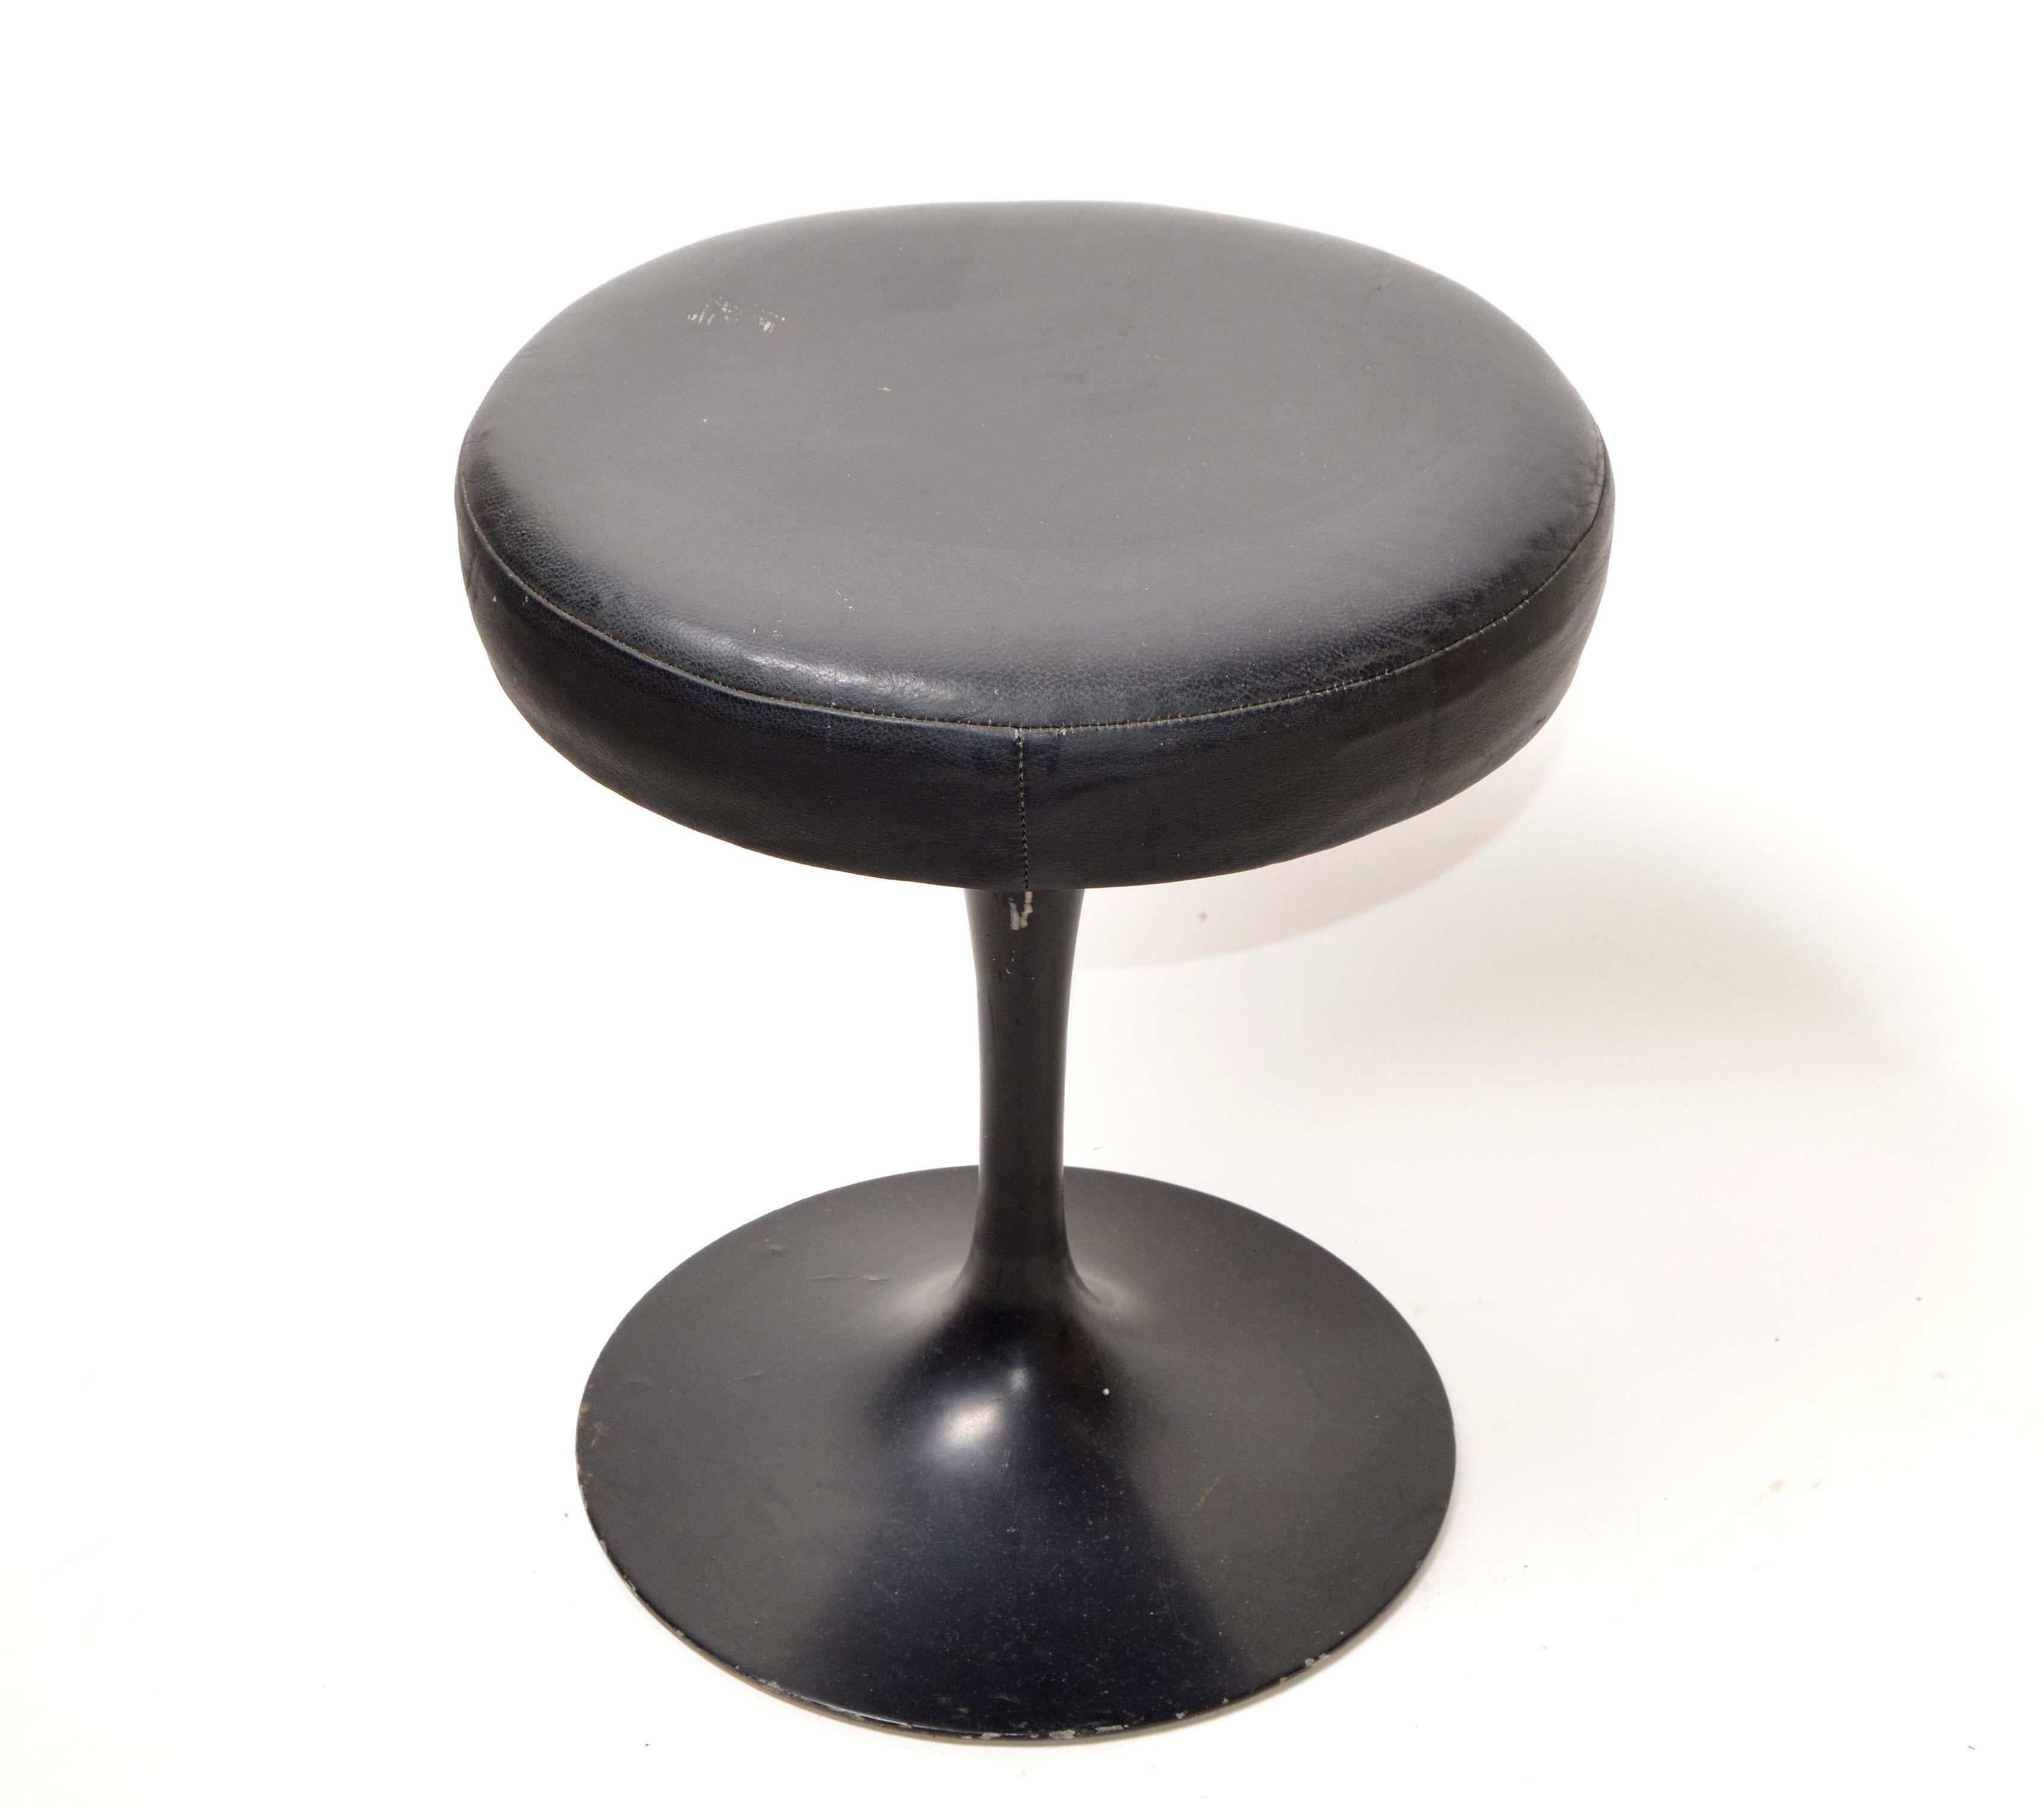 Mid-Century Modern early Knoll Associates Tulip Eero Saarinen stool designed in the 1950s.
Painted aluminum tulip stand in a cream finish and upholstered in original black leather.
The base is numbered BR 51 otherwise no markings.